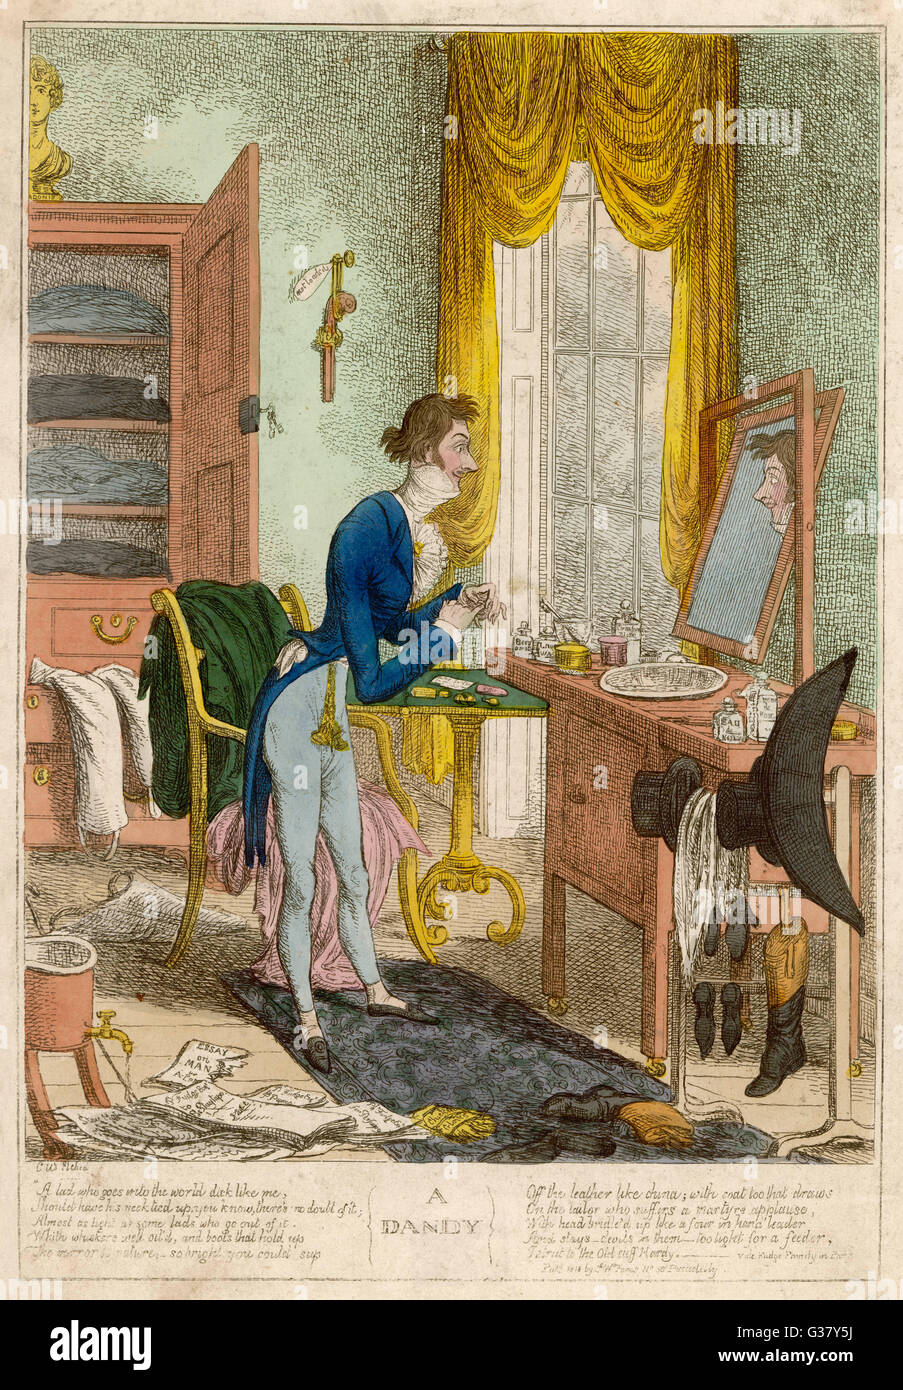 A dandy at his dressing table, 1818 Stock Photo